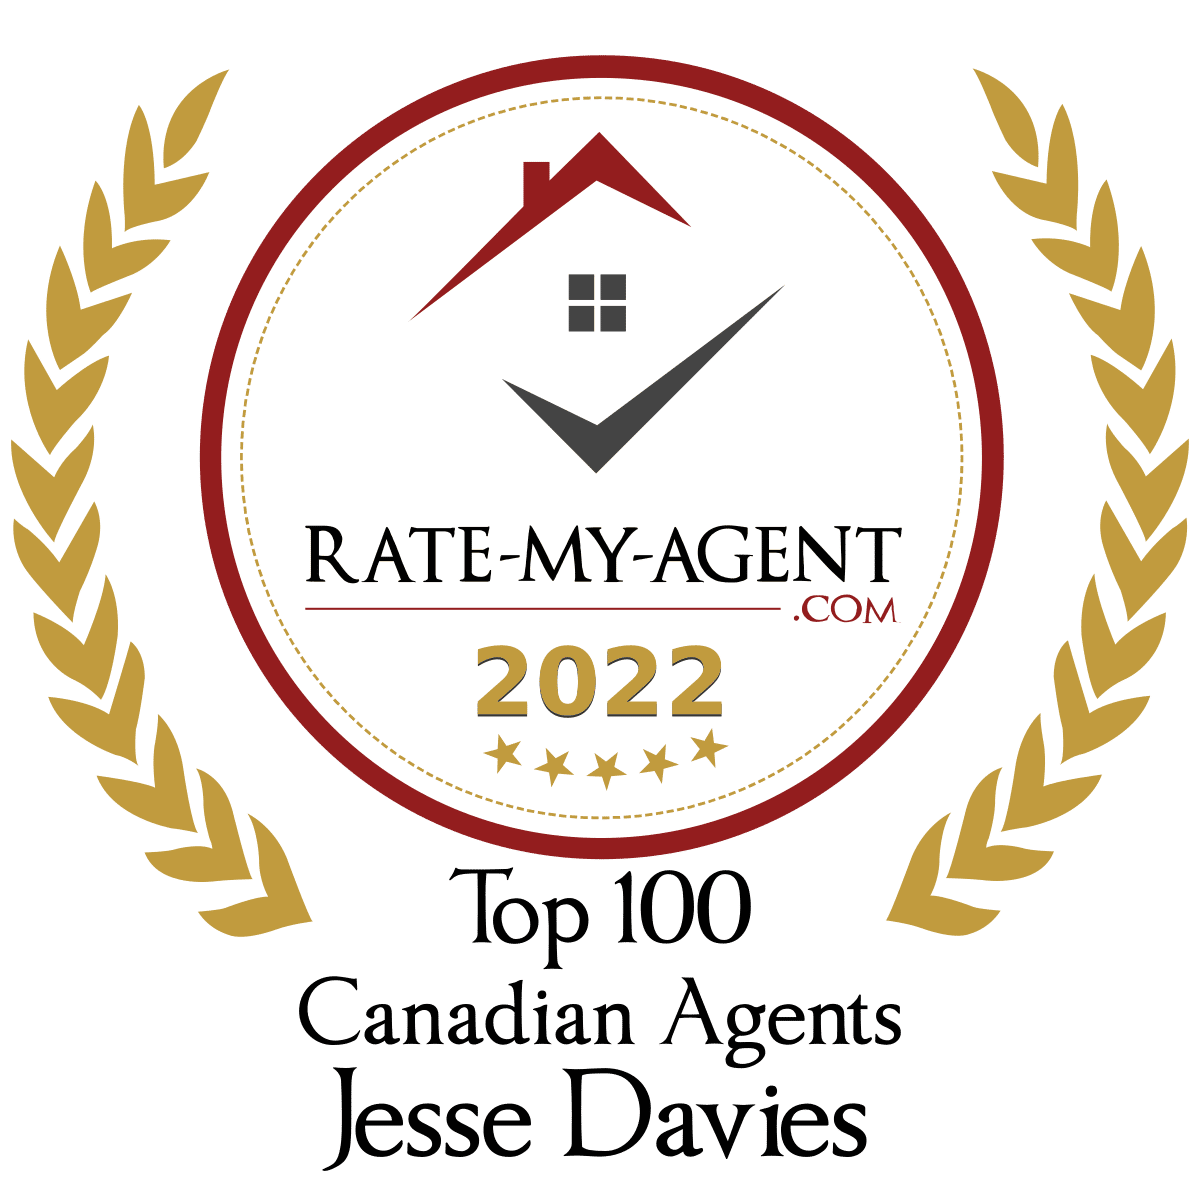 Top 100 Canadian Agent Badge for Jesse  Davies by Rate-My-Agent.com